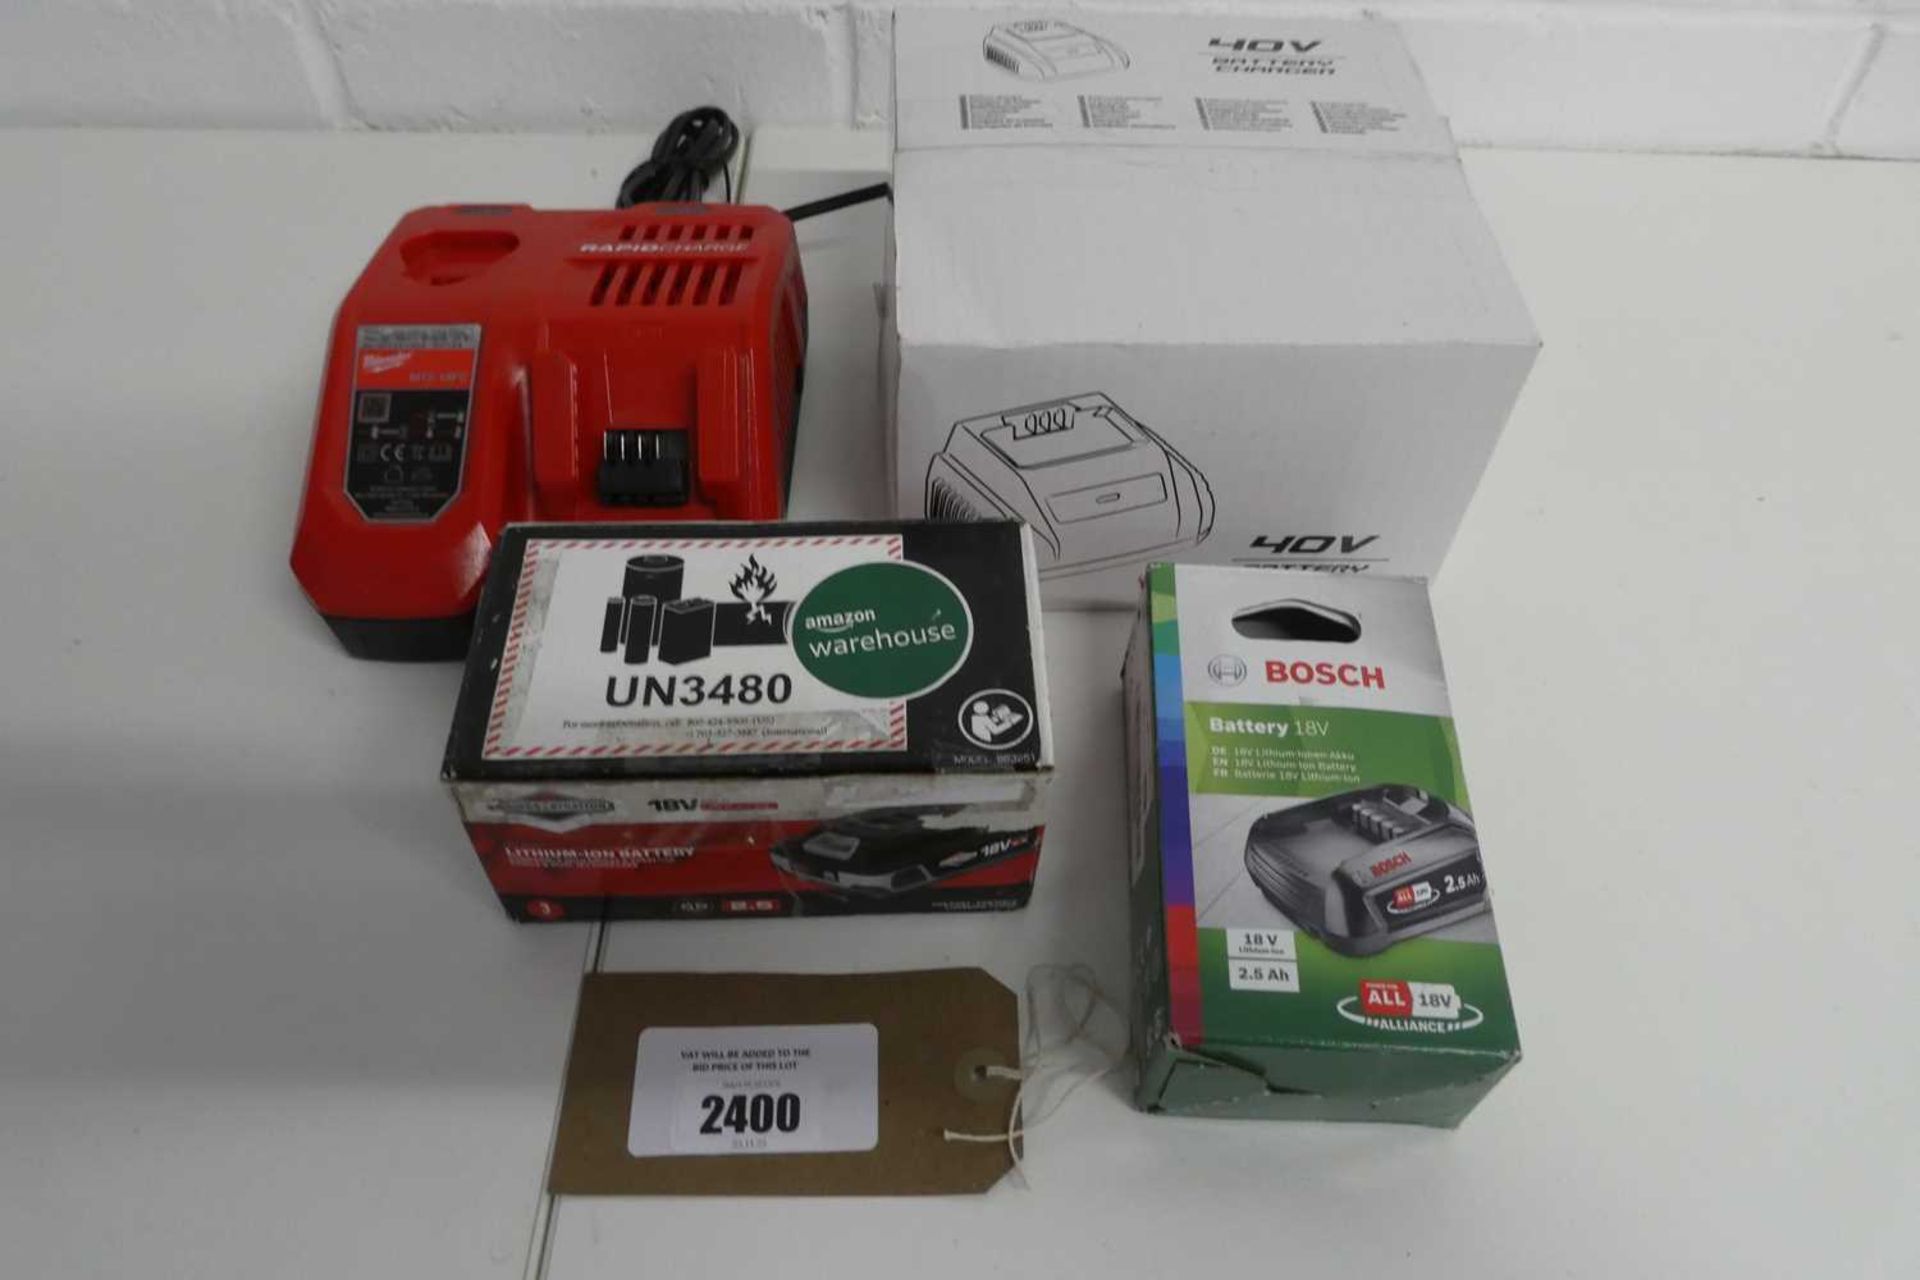 +VAT Milwaukee 18v battery charger together with a boxed 40v battery charger, Bosch 18v lithium